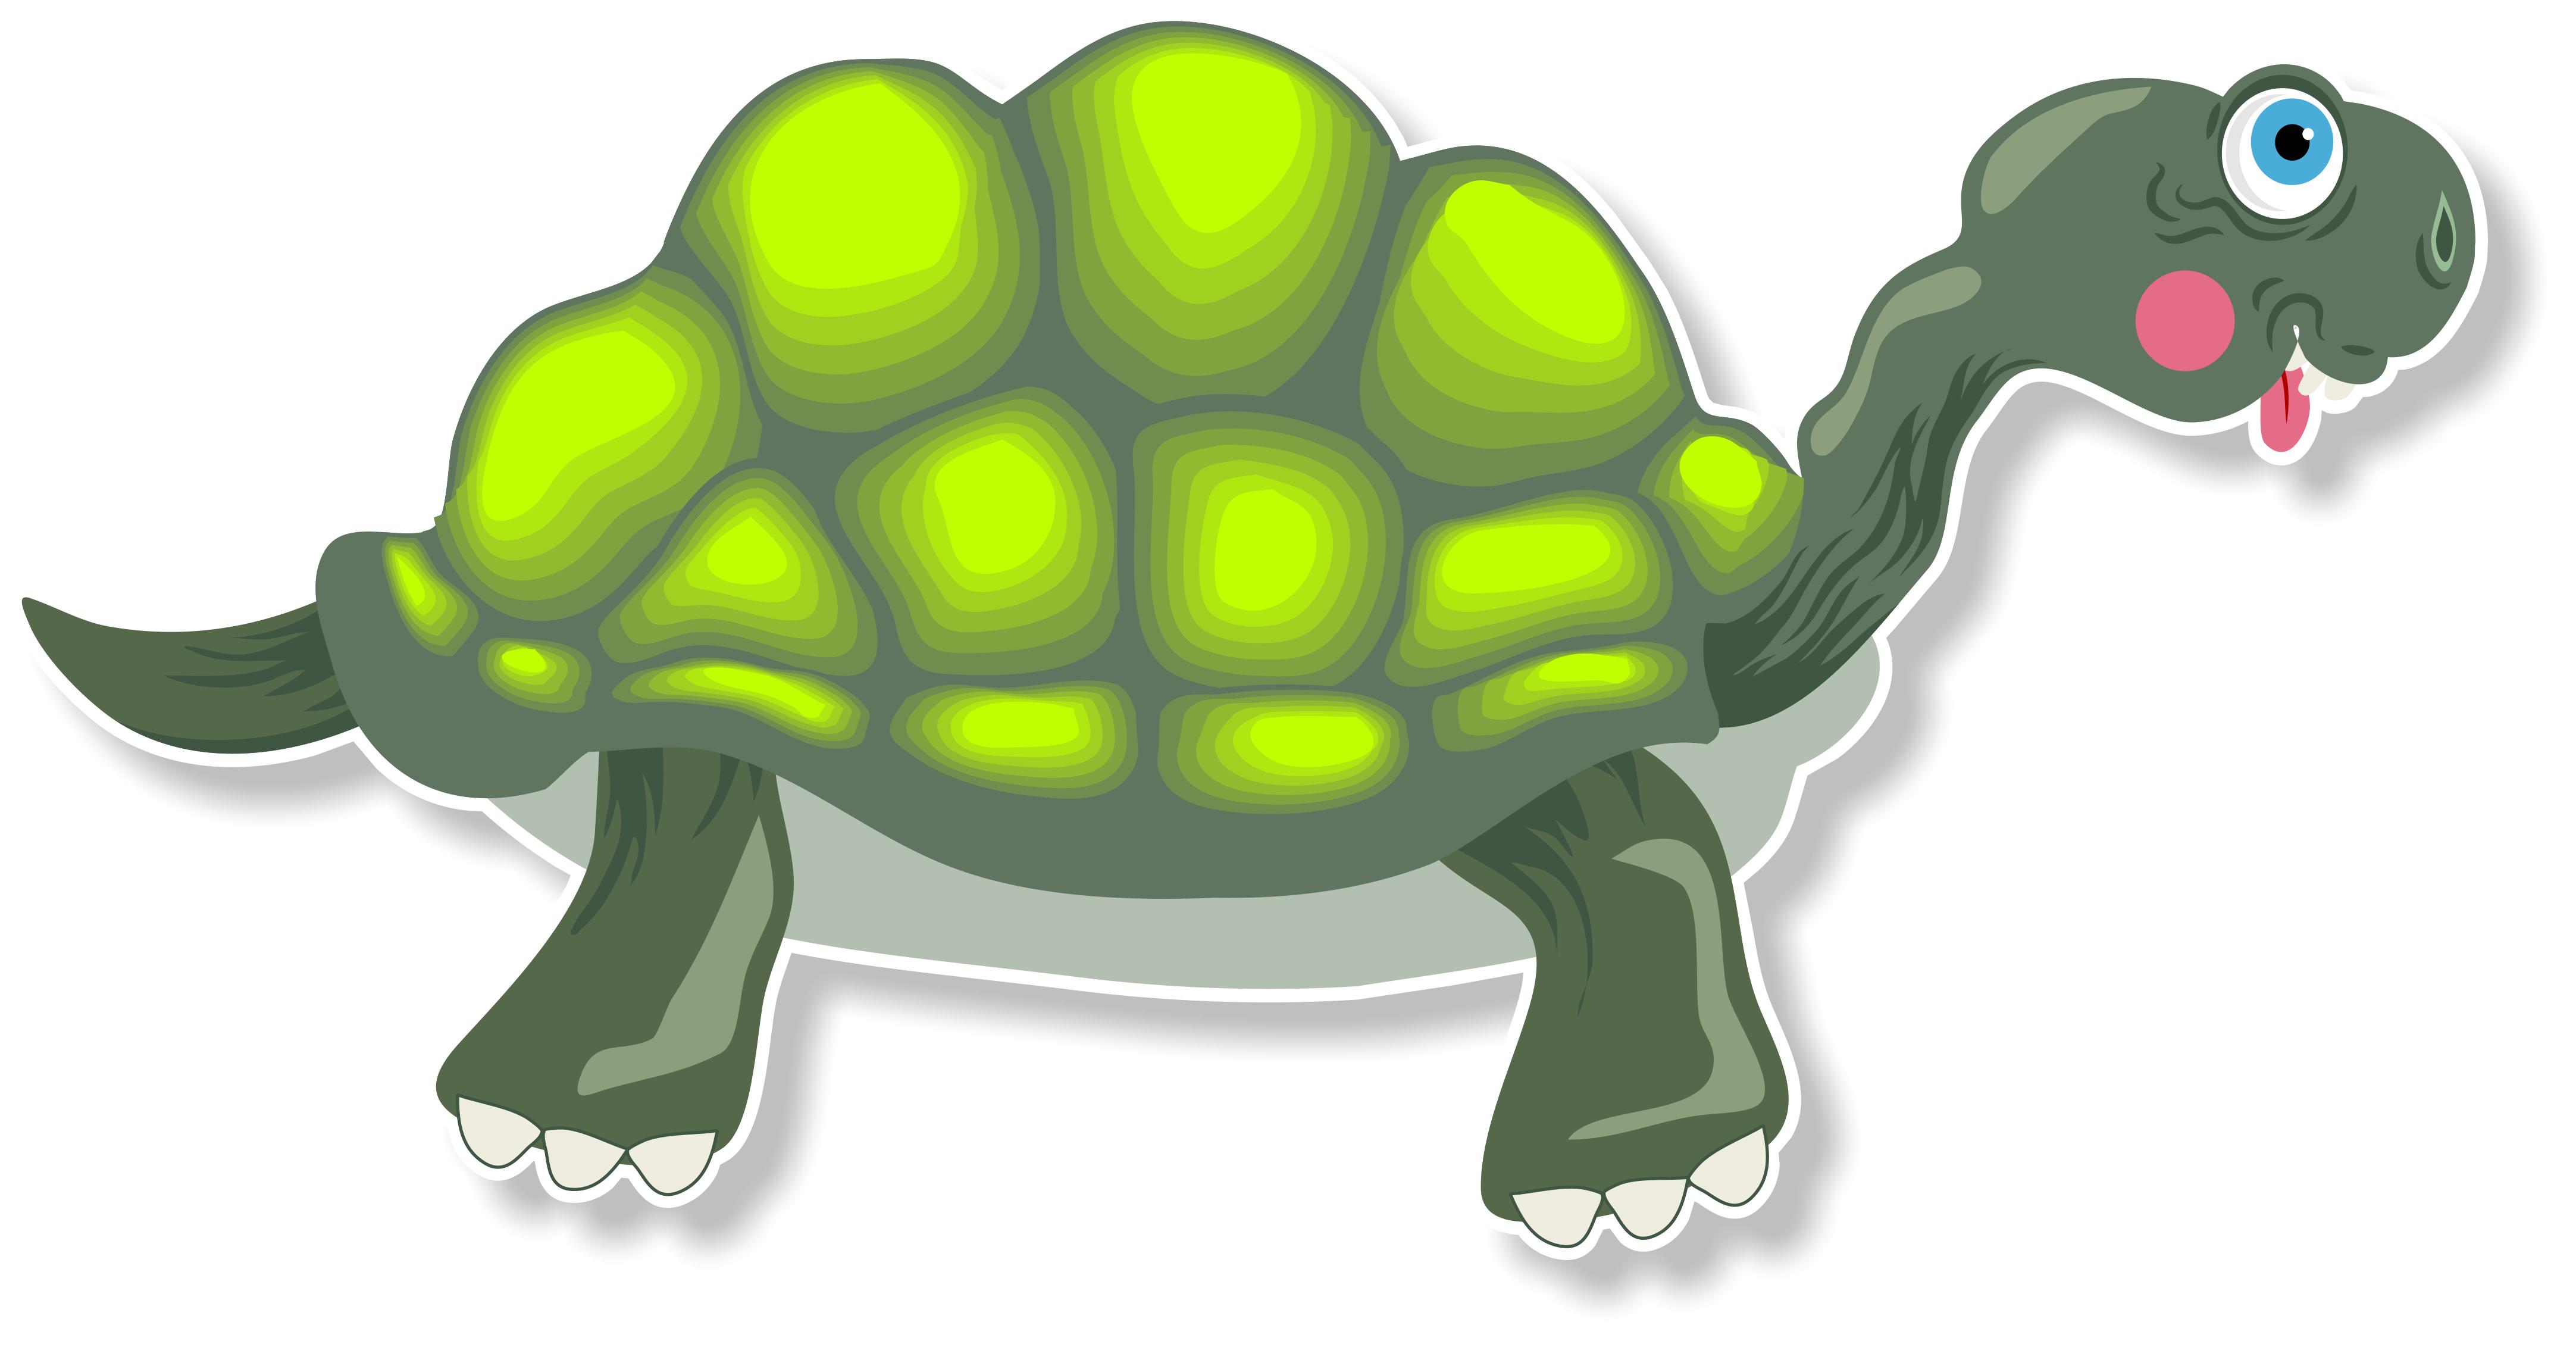 Cartoon Tortoise | Free Images at Clipart library - vector clip art 